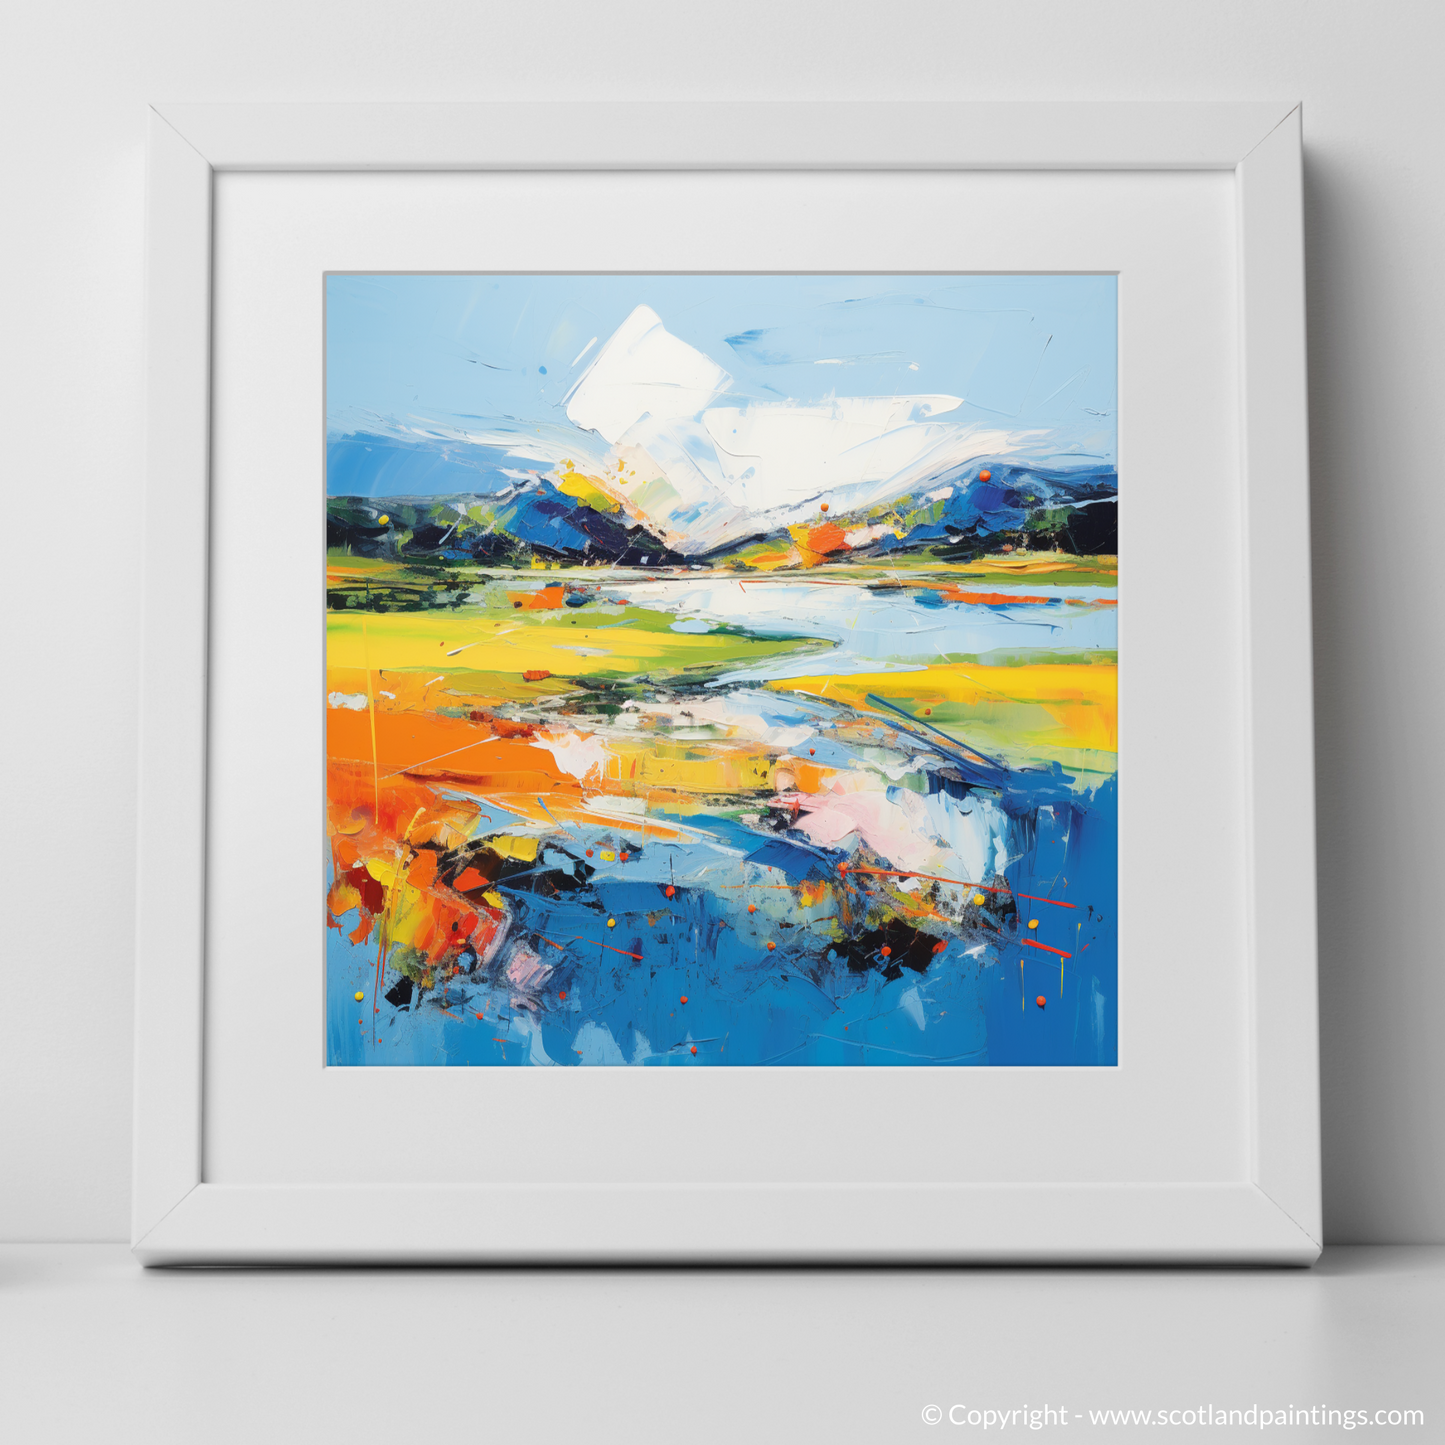 Art Print of Loch Doon, Ayrshire in summer with a white frame